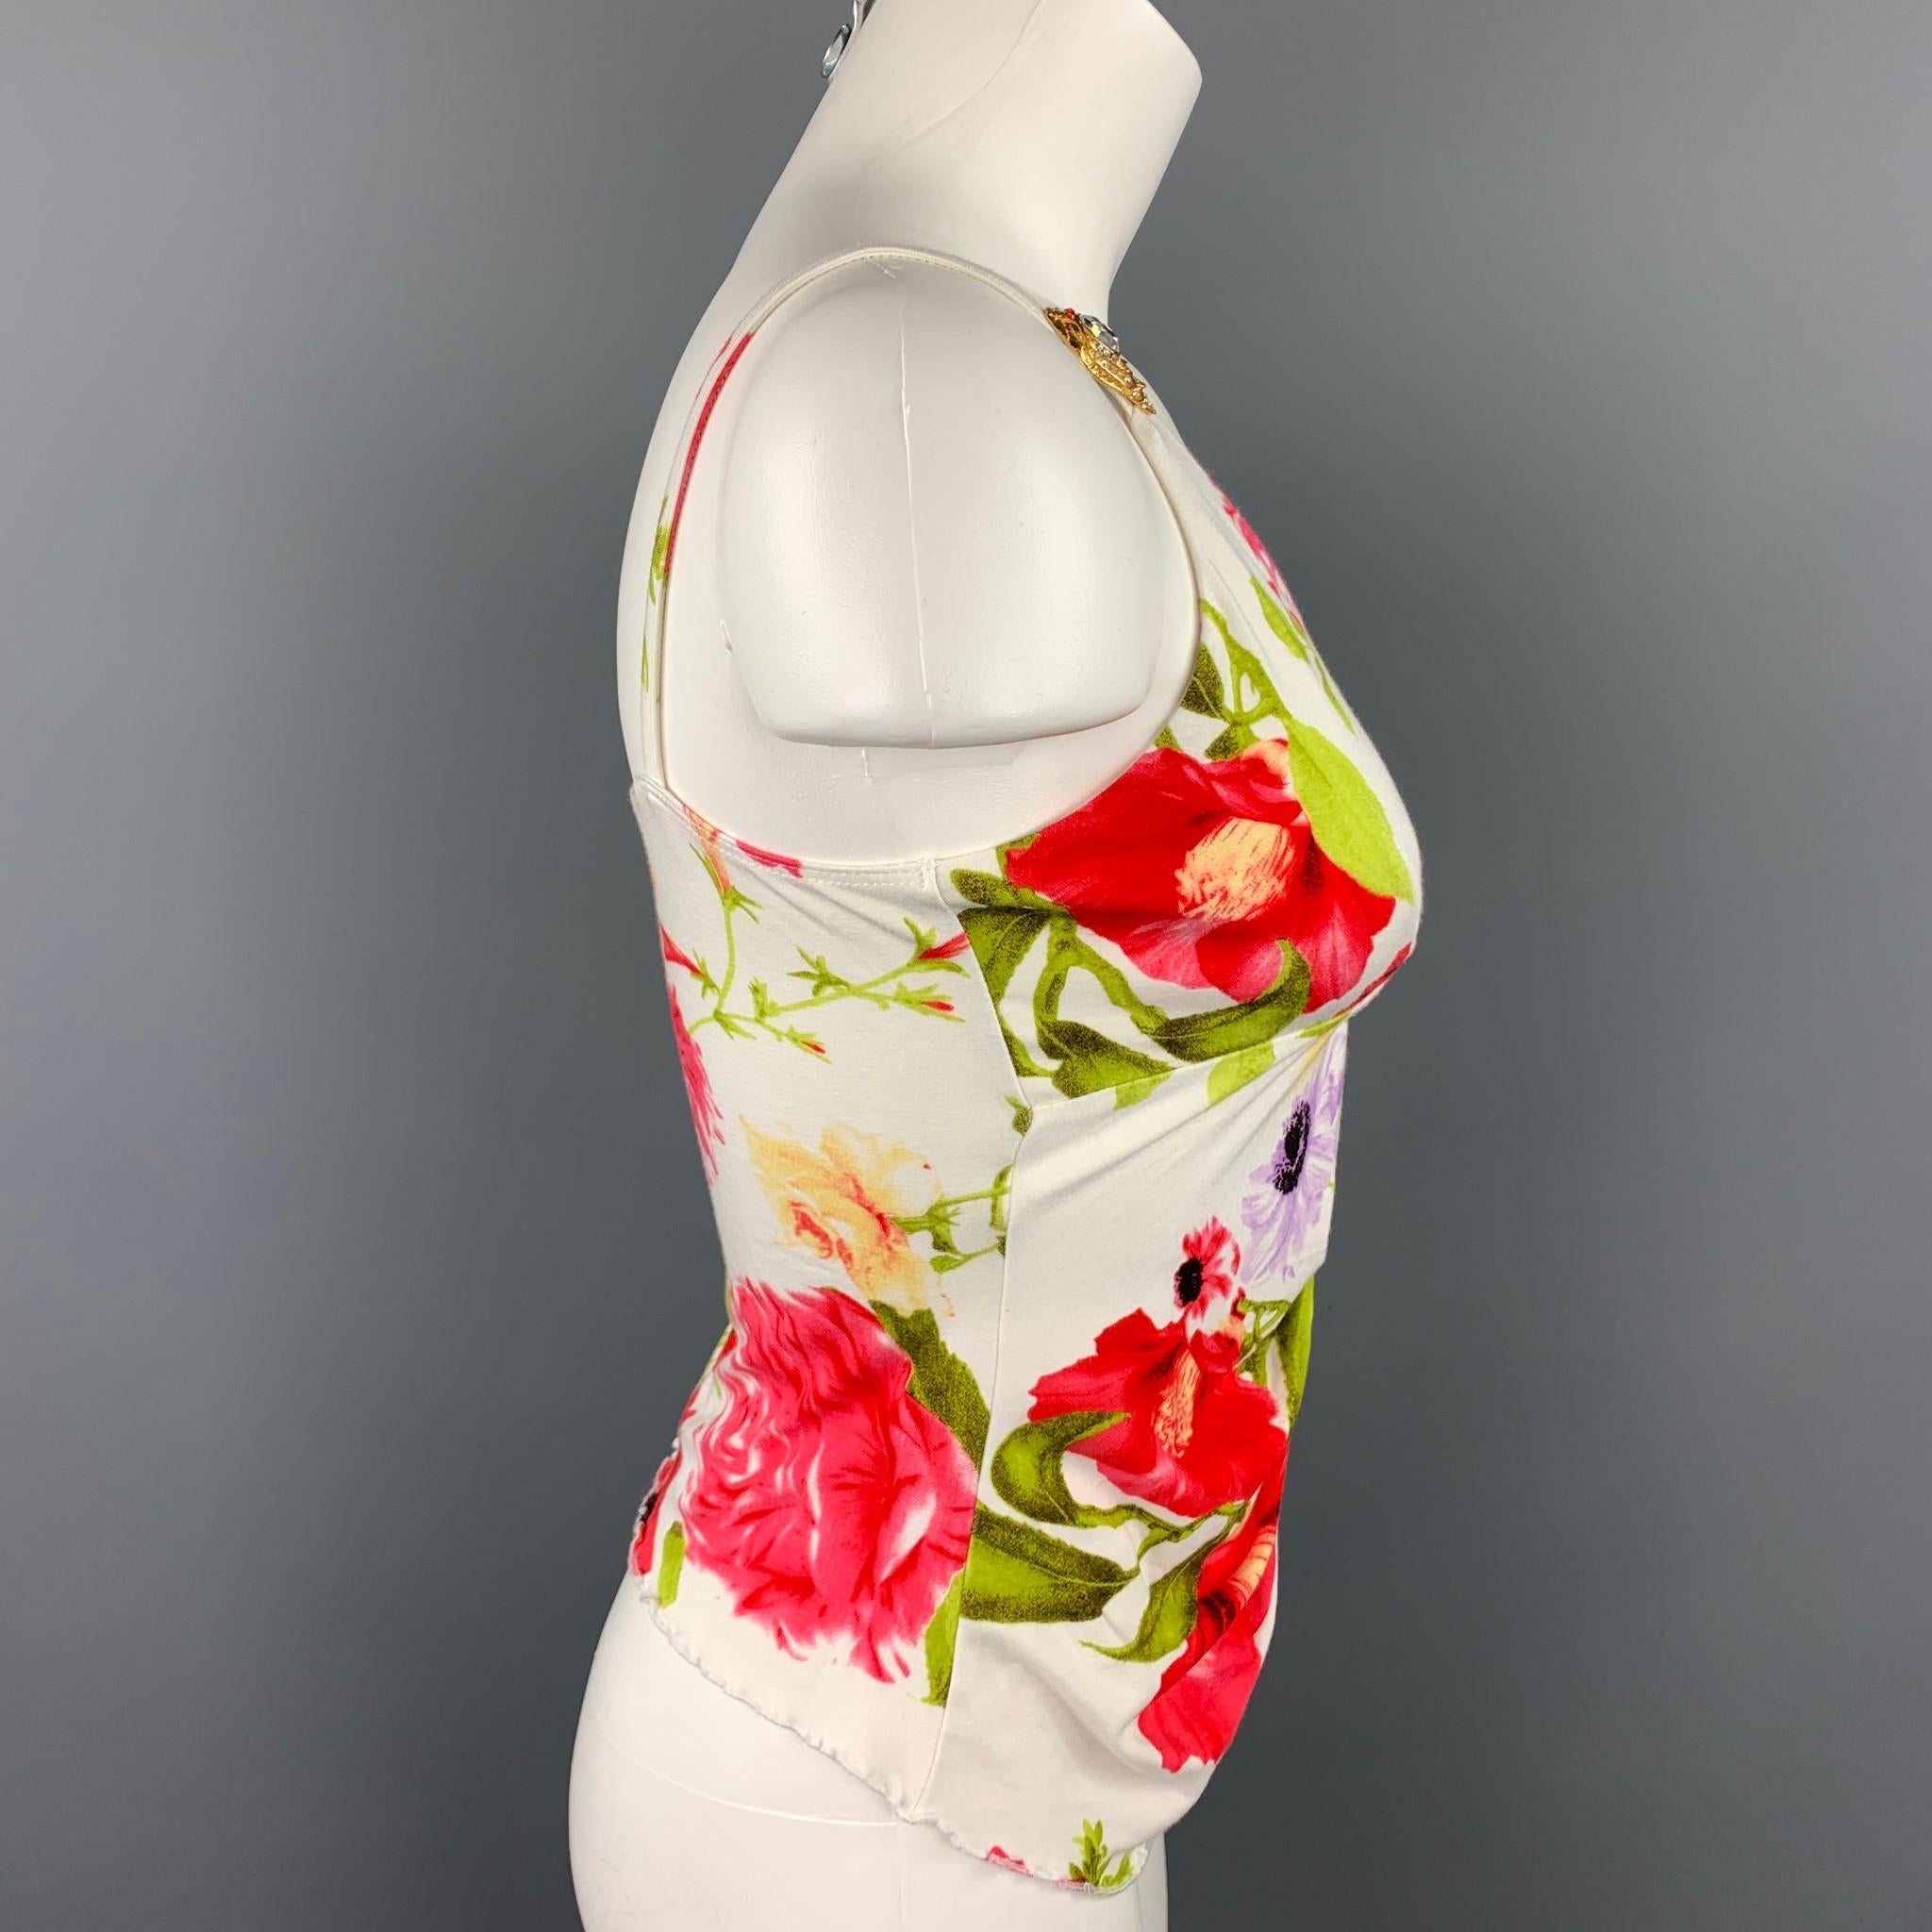 ROBERTO CAVALLI blouse comes in a multi-color floral jersey material featuring spaghetti straps, rhinestone embellishments, and a ruched hem. 

Very Good Pre-Owned Condition.
Marked: No fabric tag

Measurements:

Bust: 28 in.
Length: 11 in. 